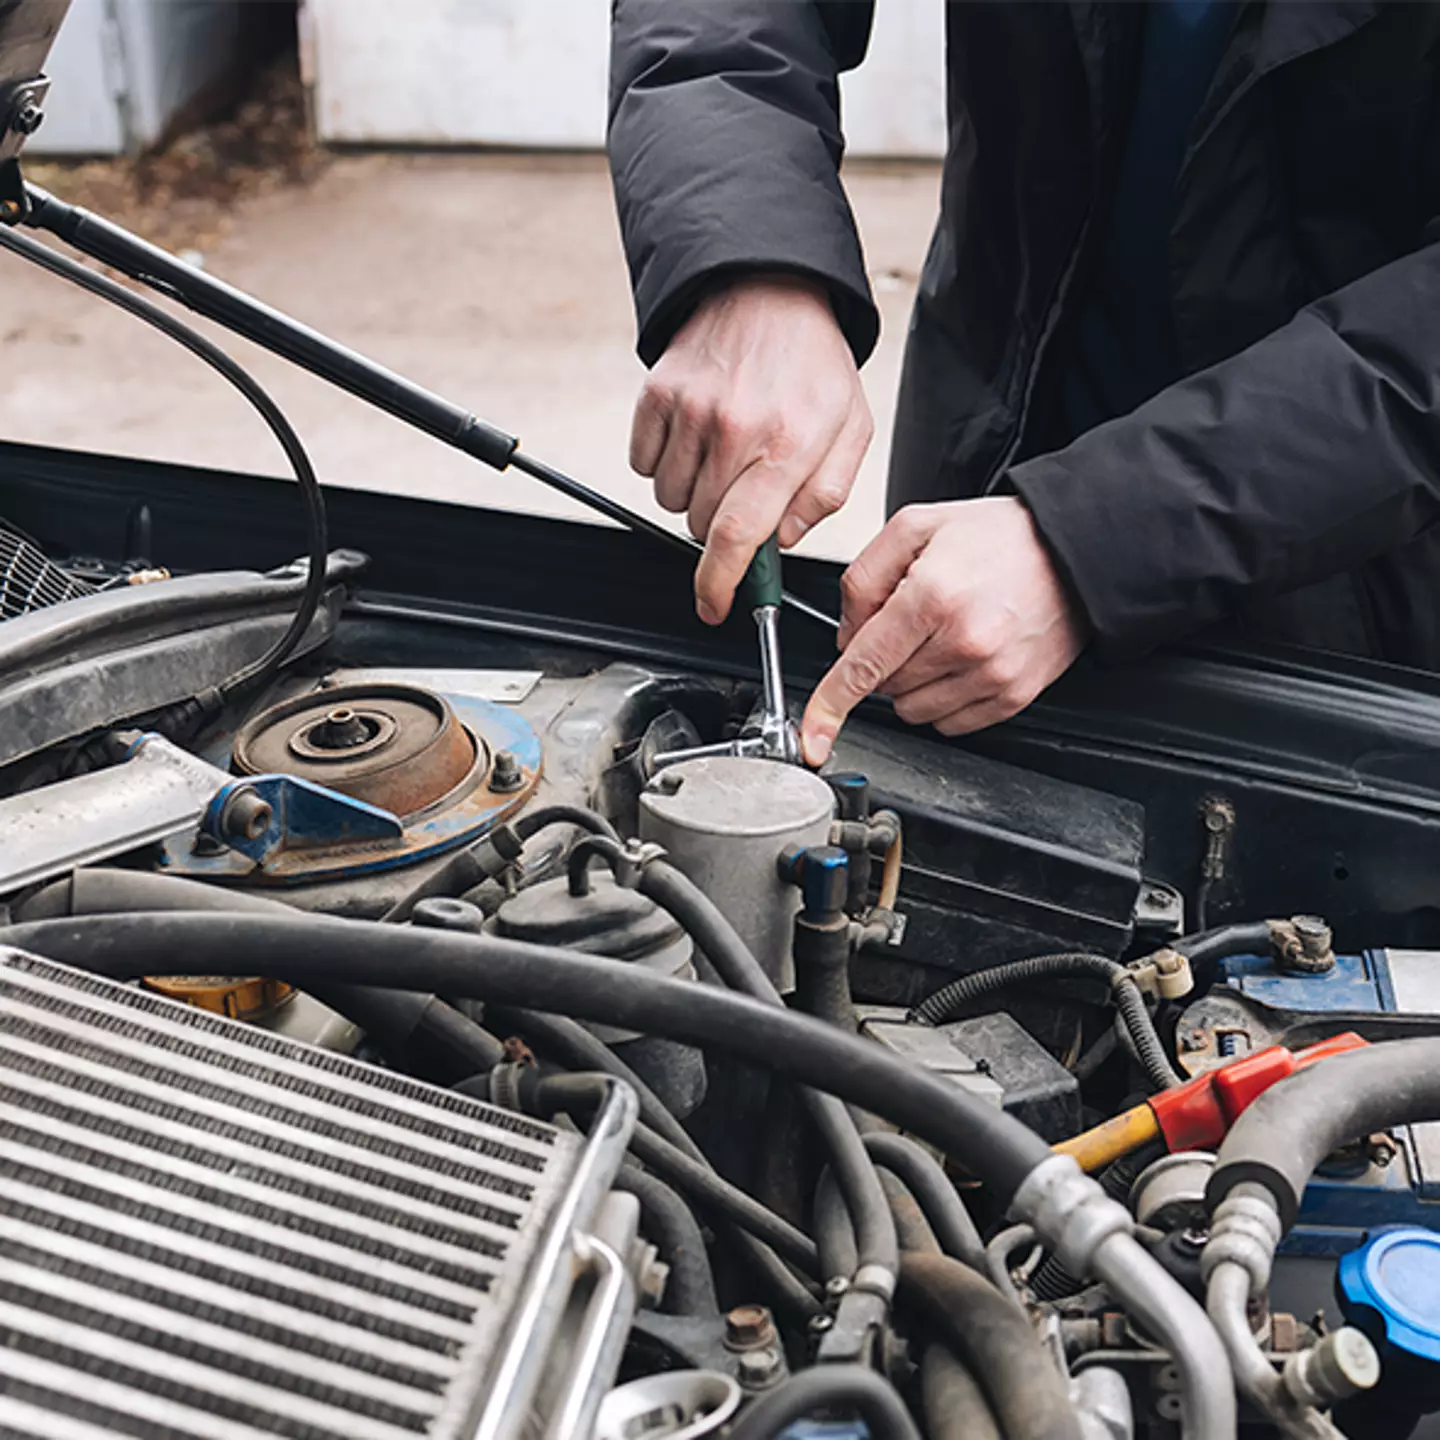 Car mechanic reveals one main warning sign that means it's time to sell your car